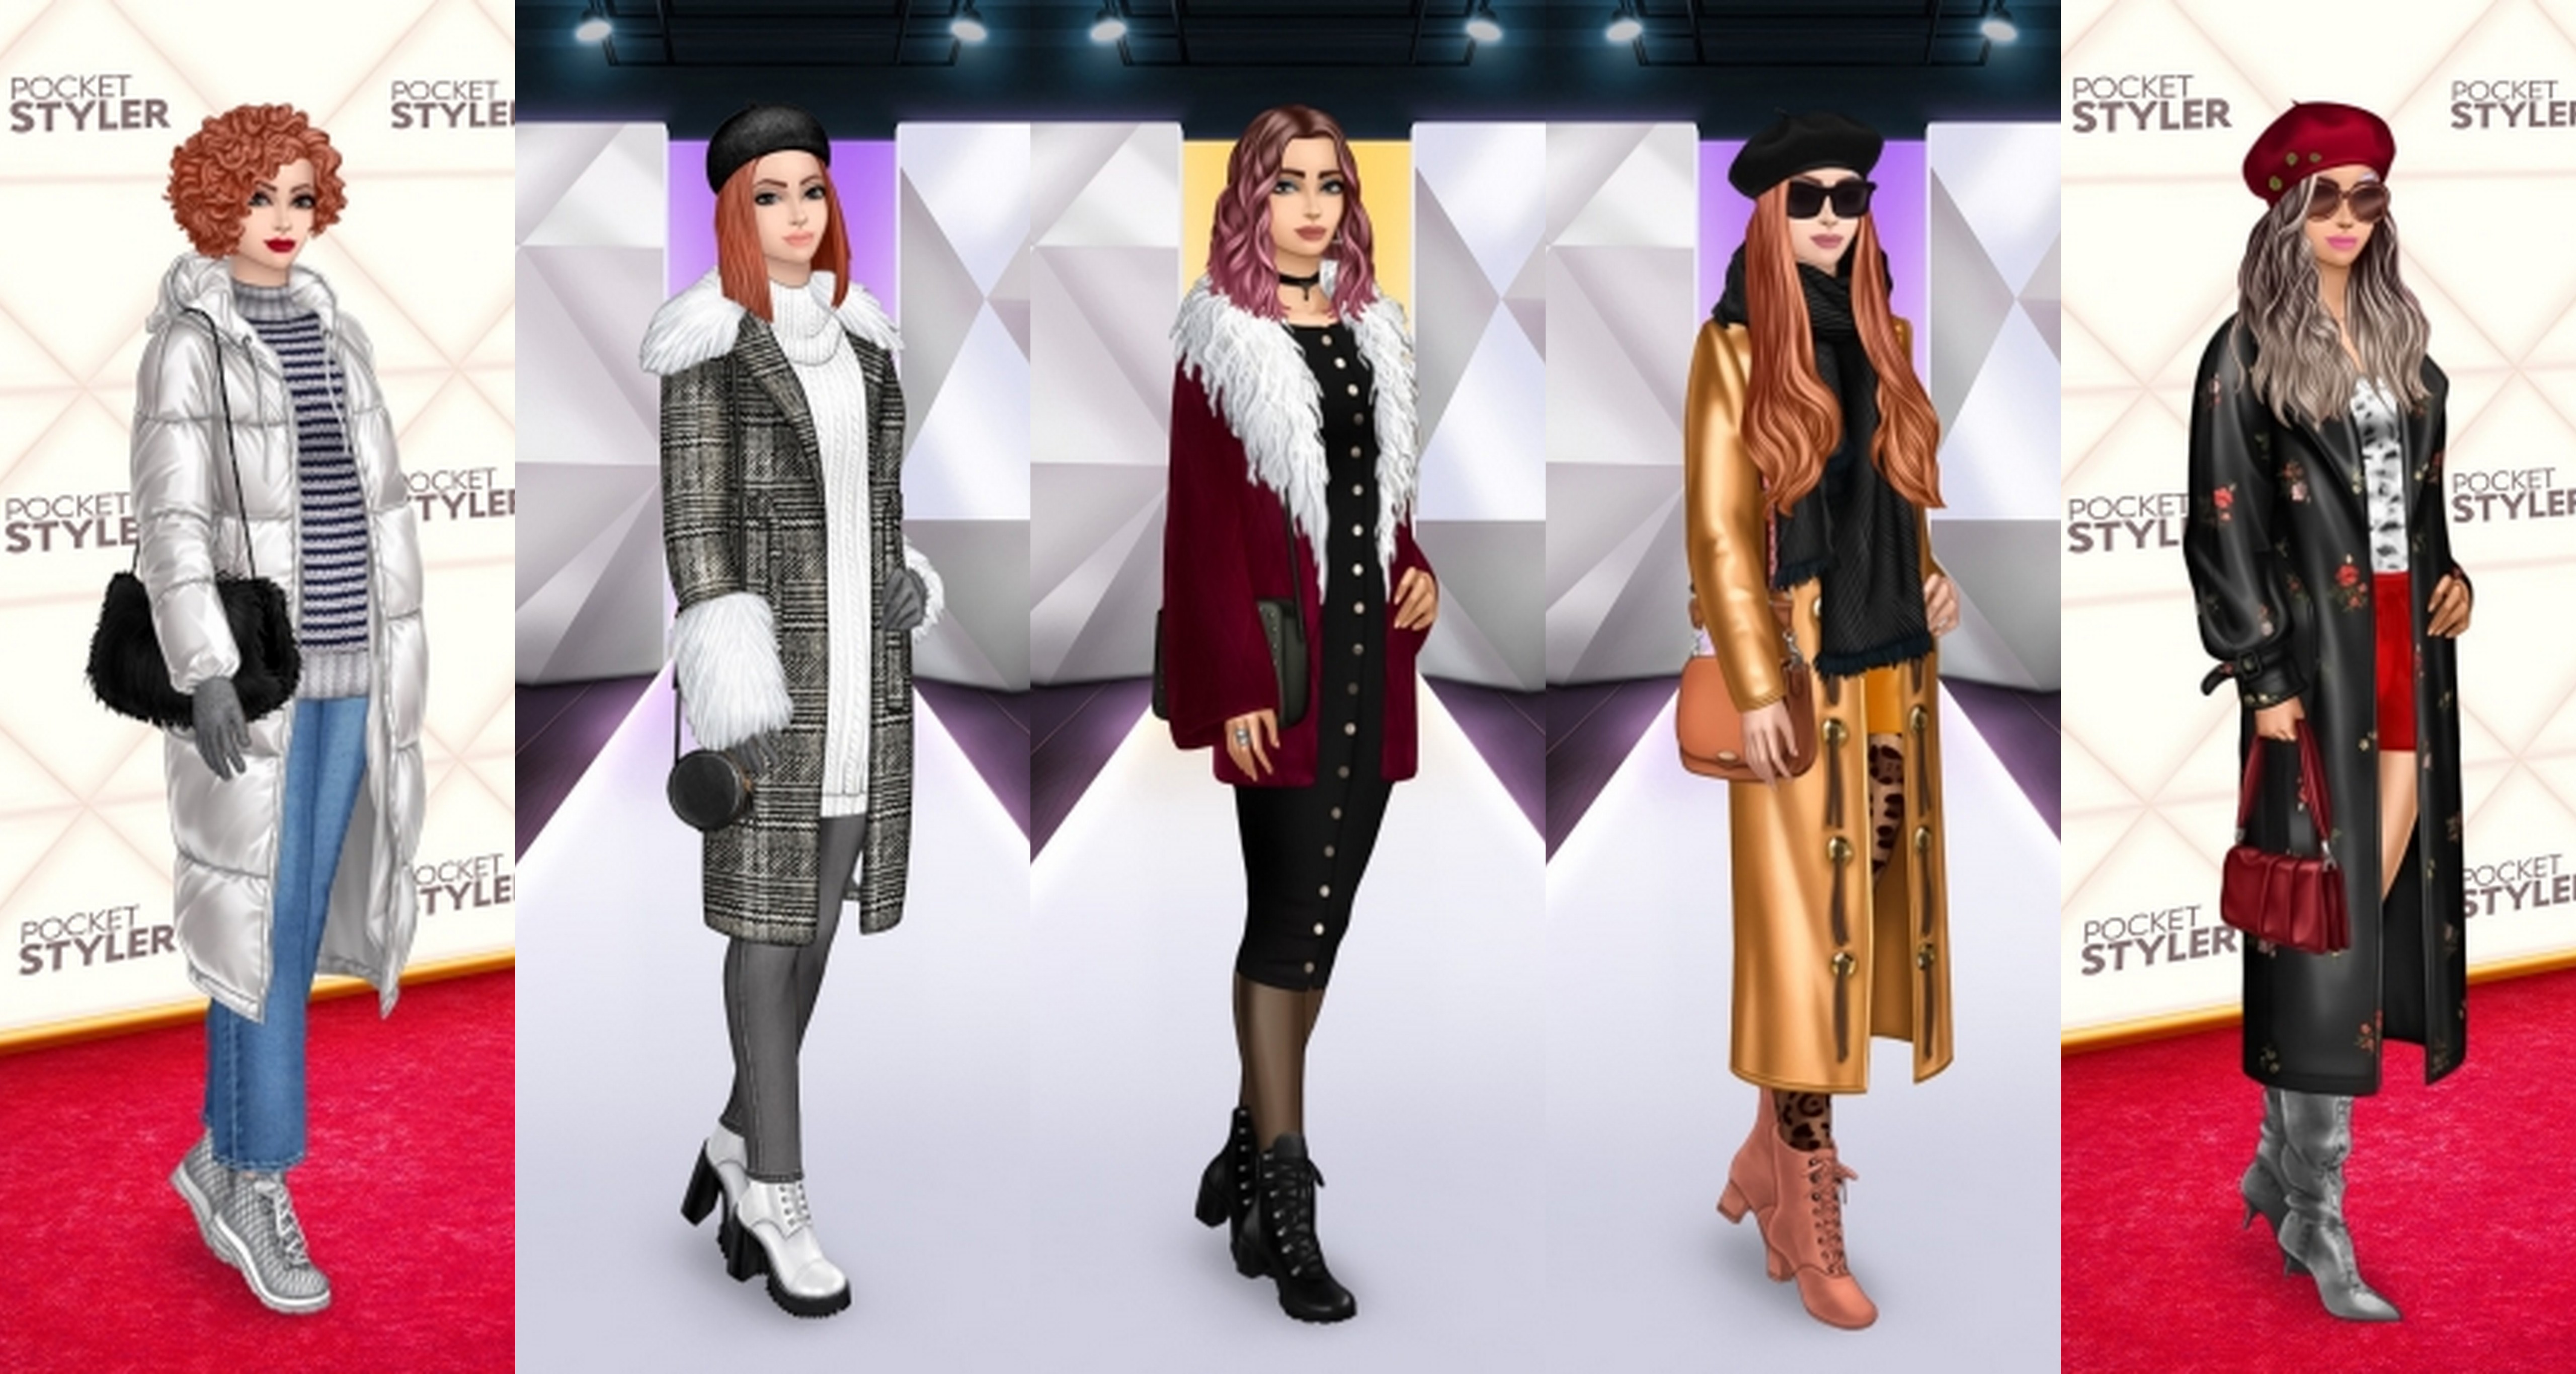 2022 Top Winter Fashion Trends Rendered in Digital Game |Designer Shares 5 Tips on Customizing Outfit